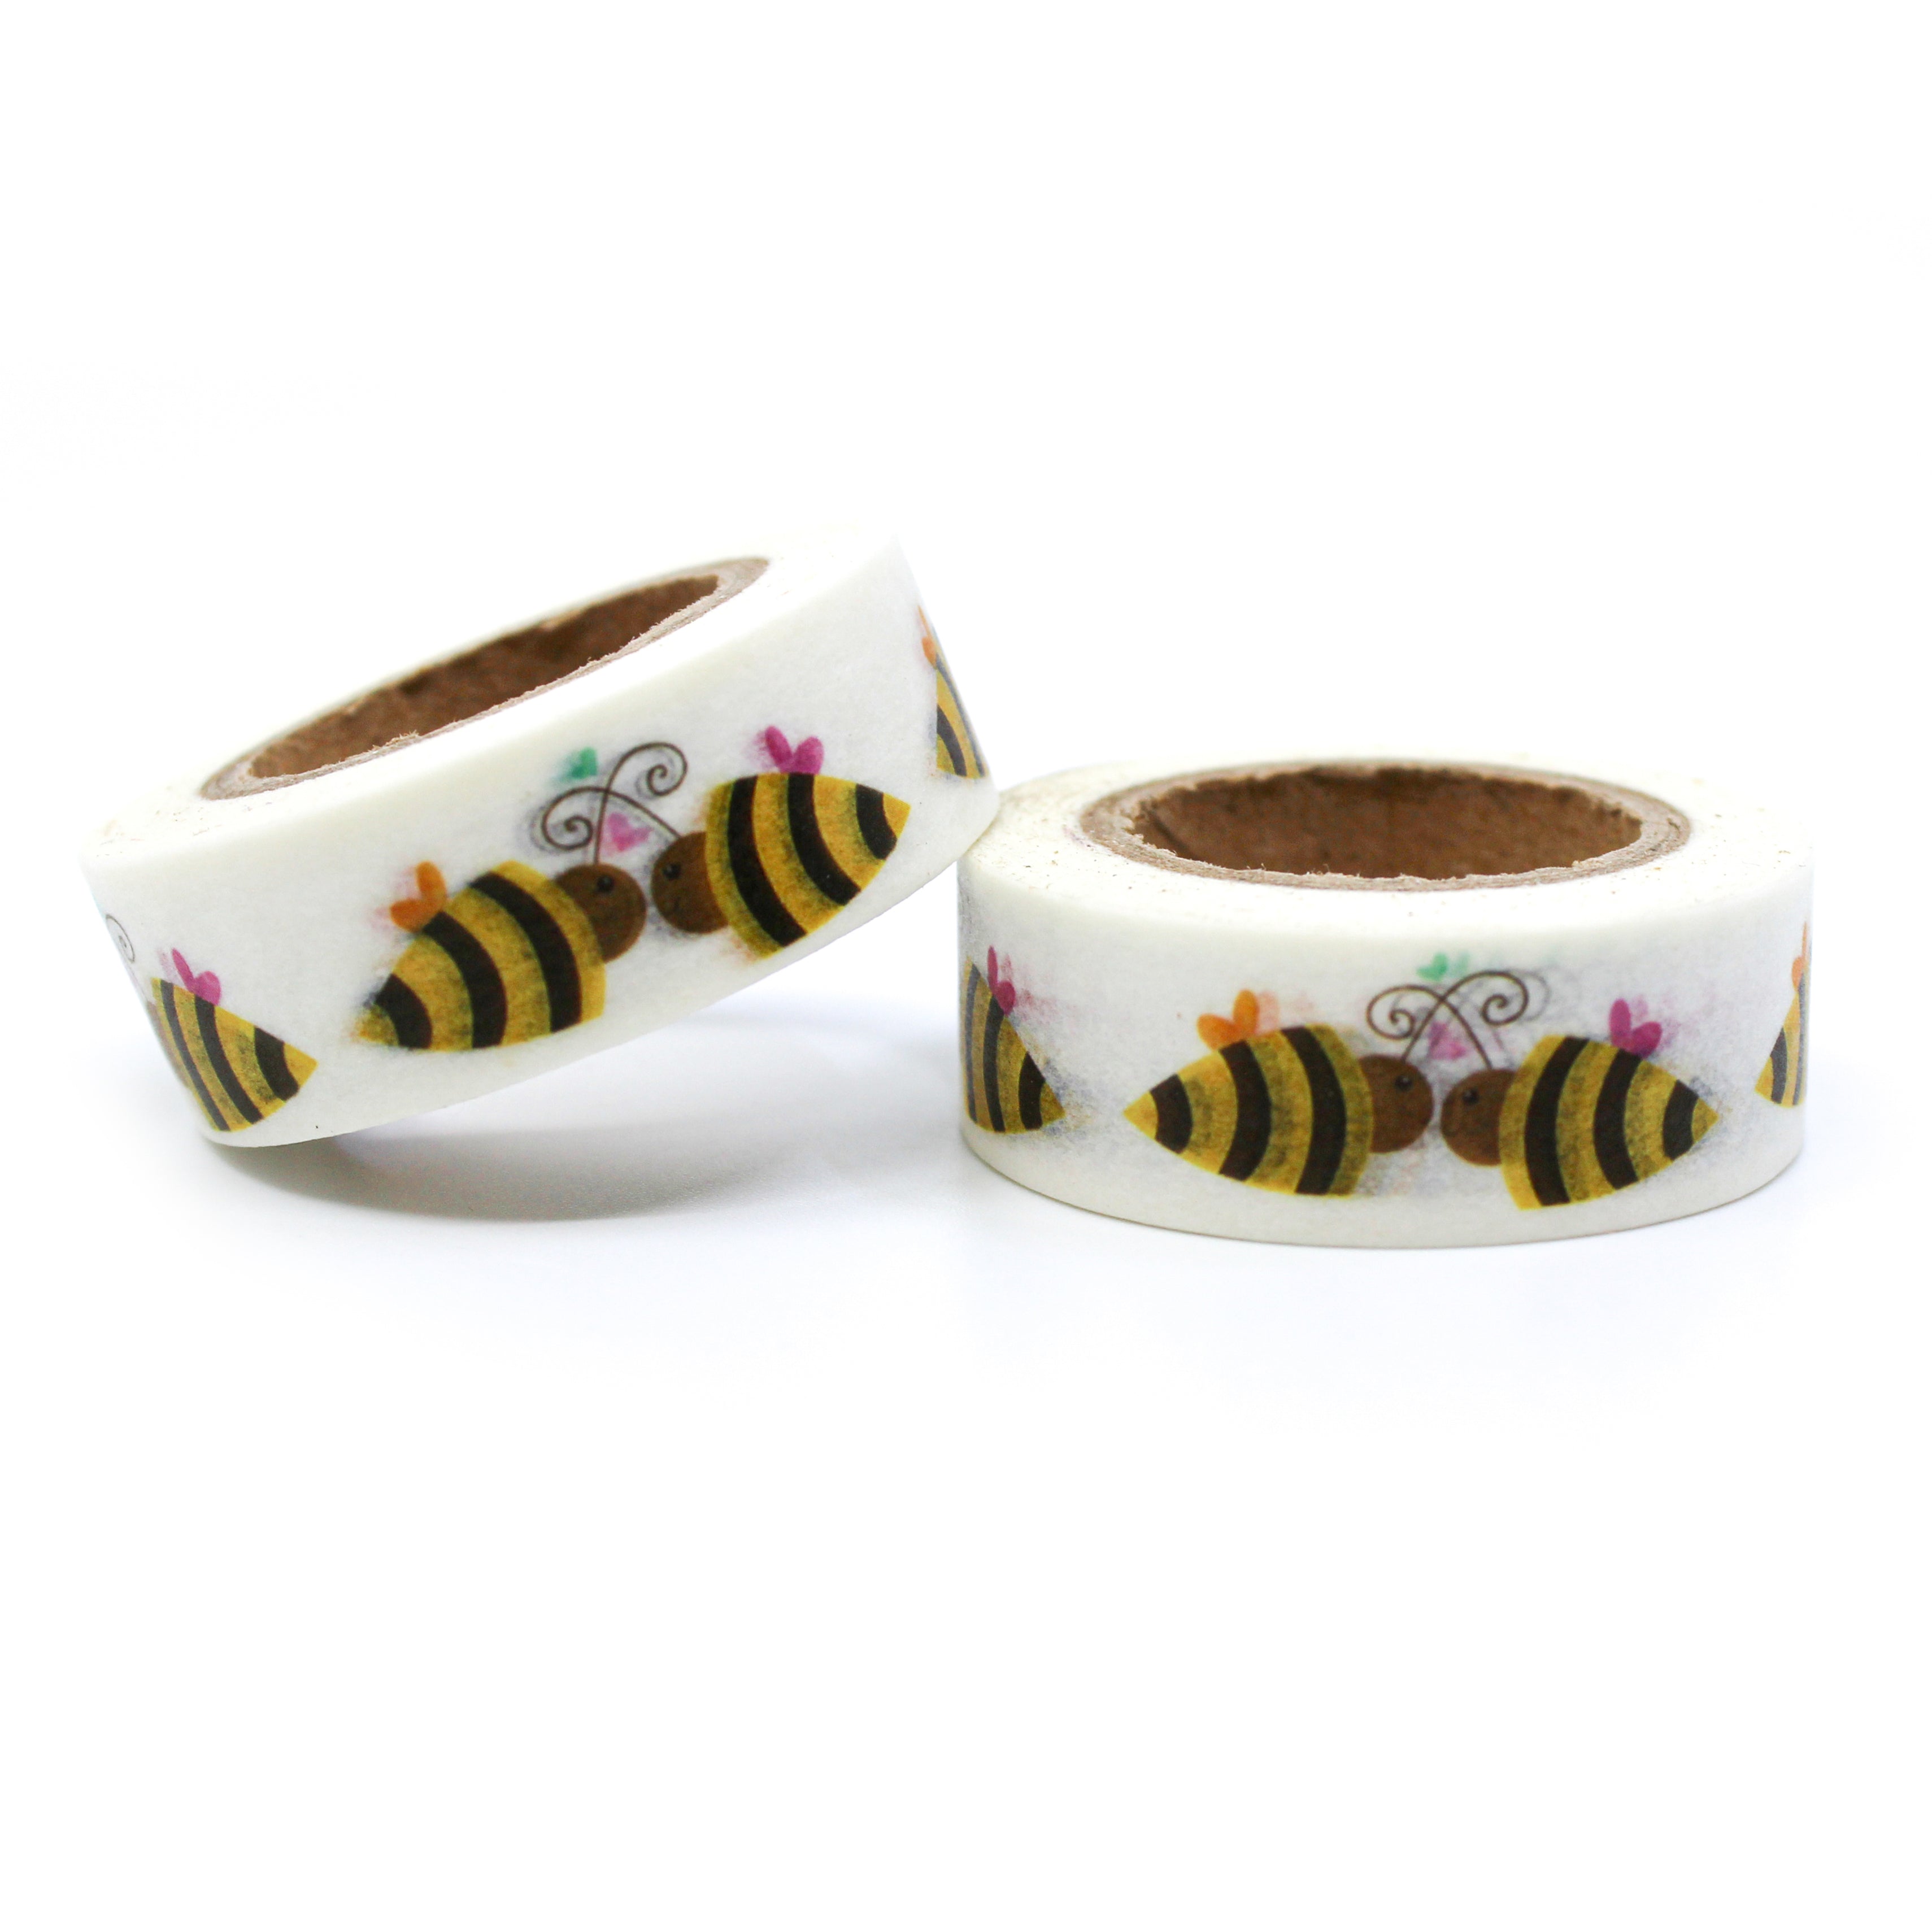 This is a yellow with black stripe color of bumble bees for Journal Supplies, Scrapbooking washi tapes from BBB Supplies Craft Shop